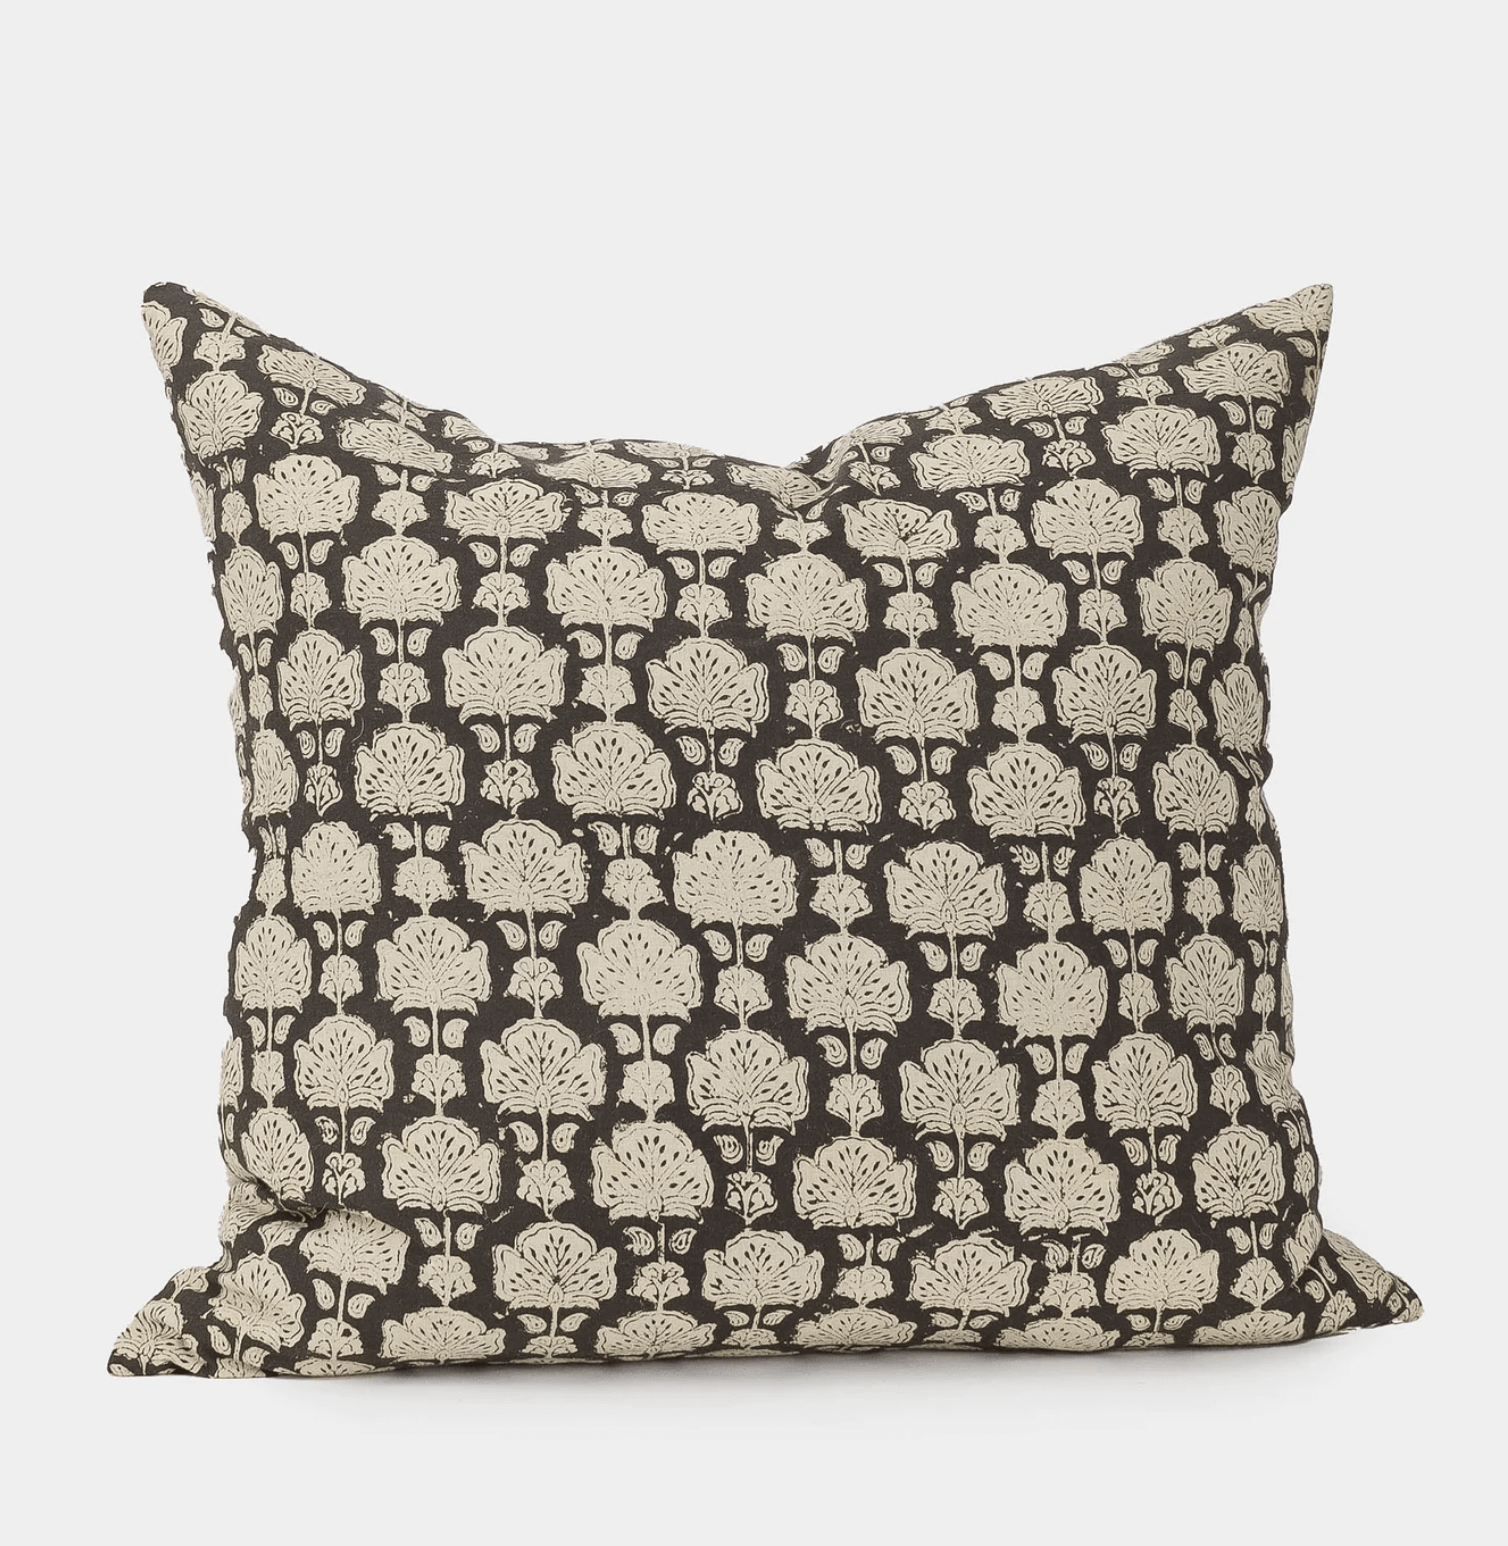 patterned cream and black pillow